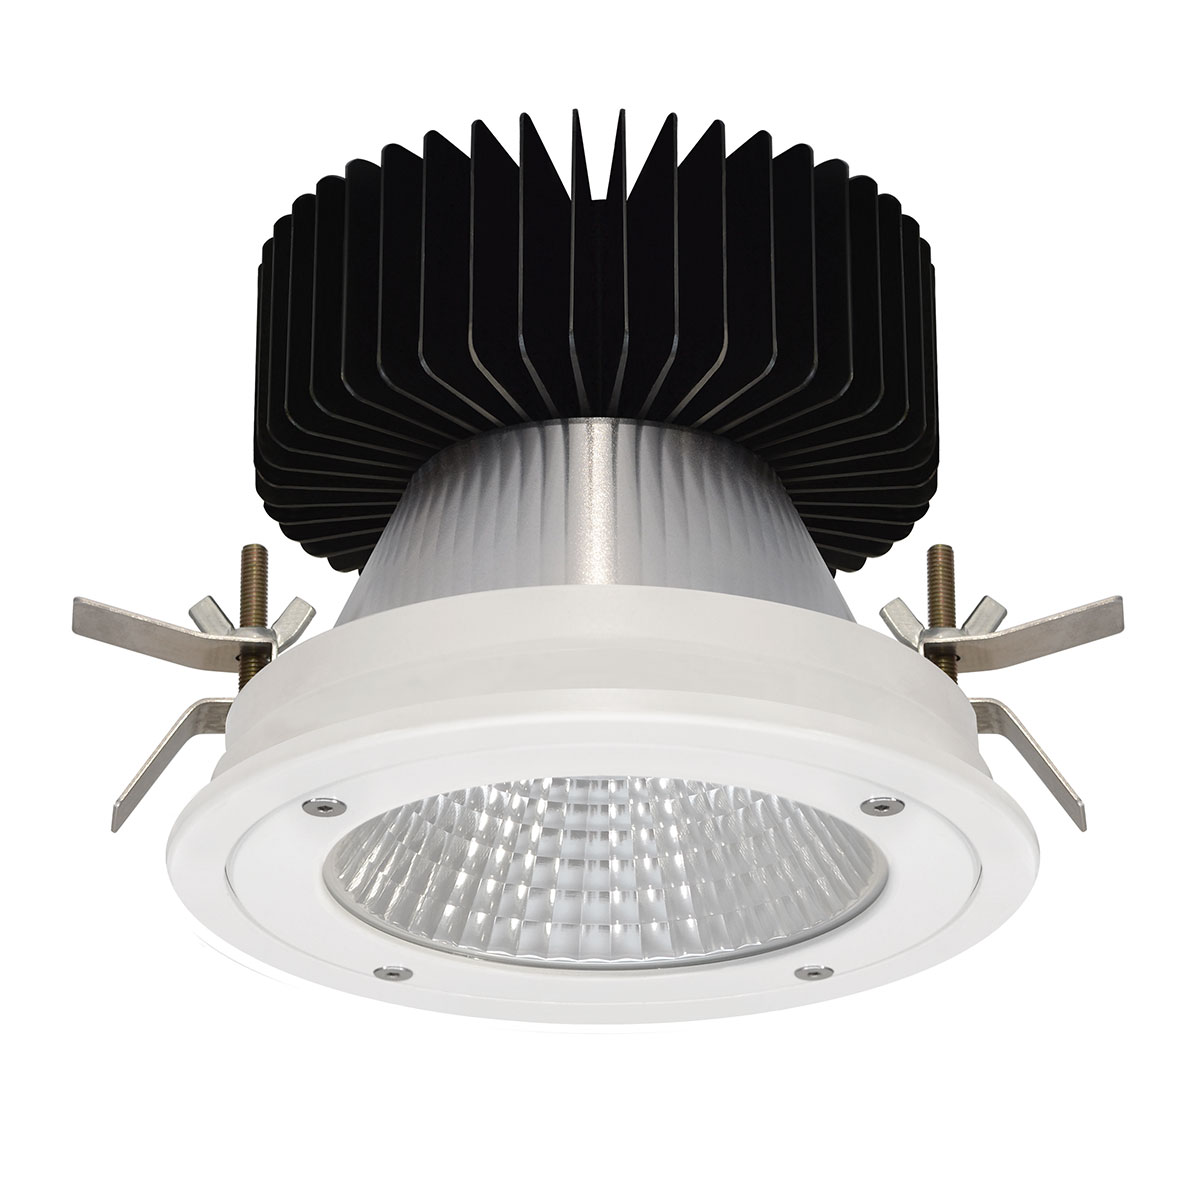 Kopa 16W Anti Tamper Fixed Round Recessed Downlight IP65 Rated 15° Degree Reflector White